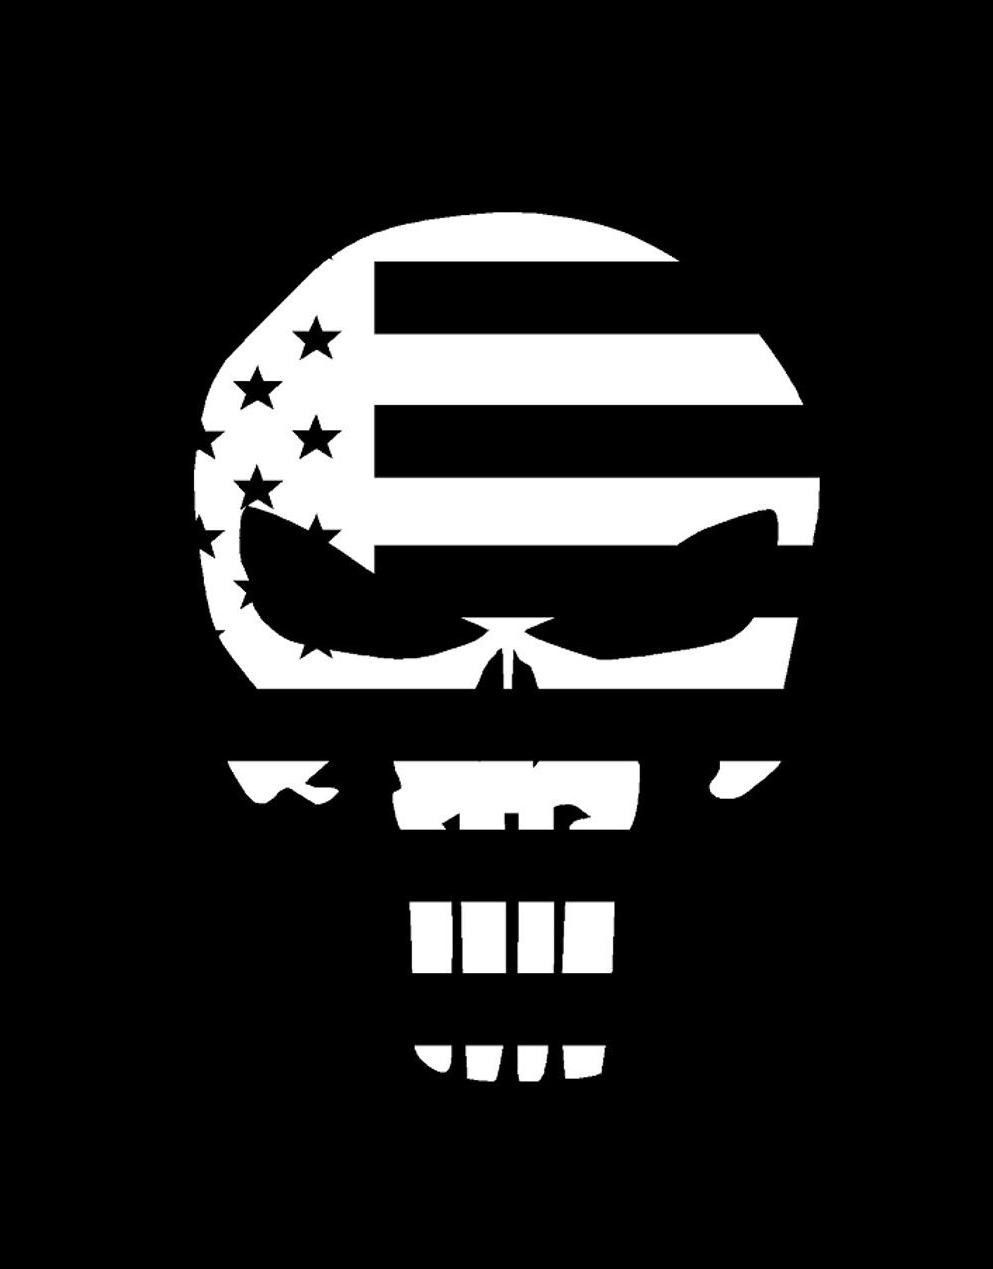 USA Flag Wallpaper with Skull by HrishitChouhan on DeviantArt